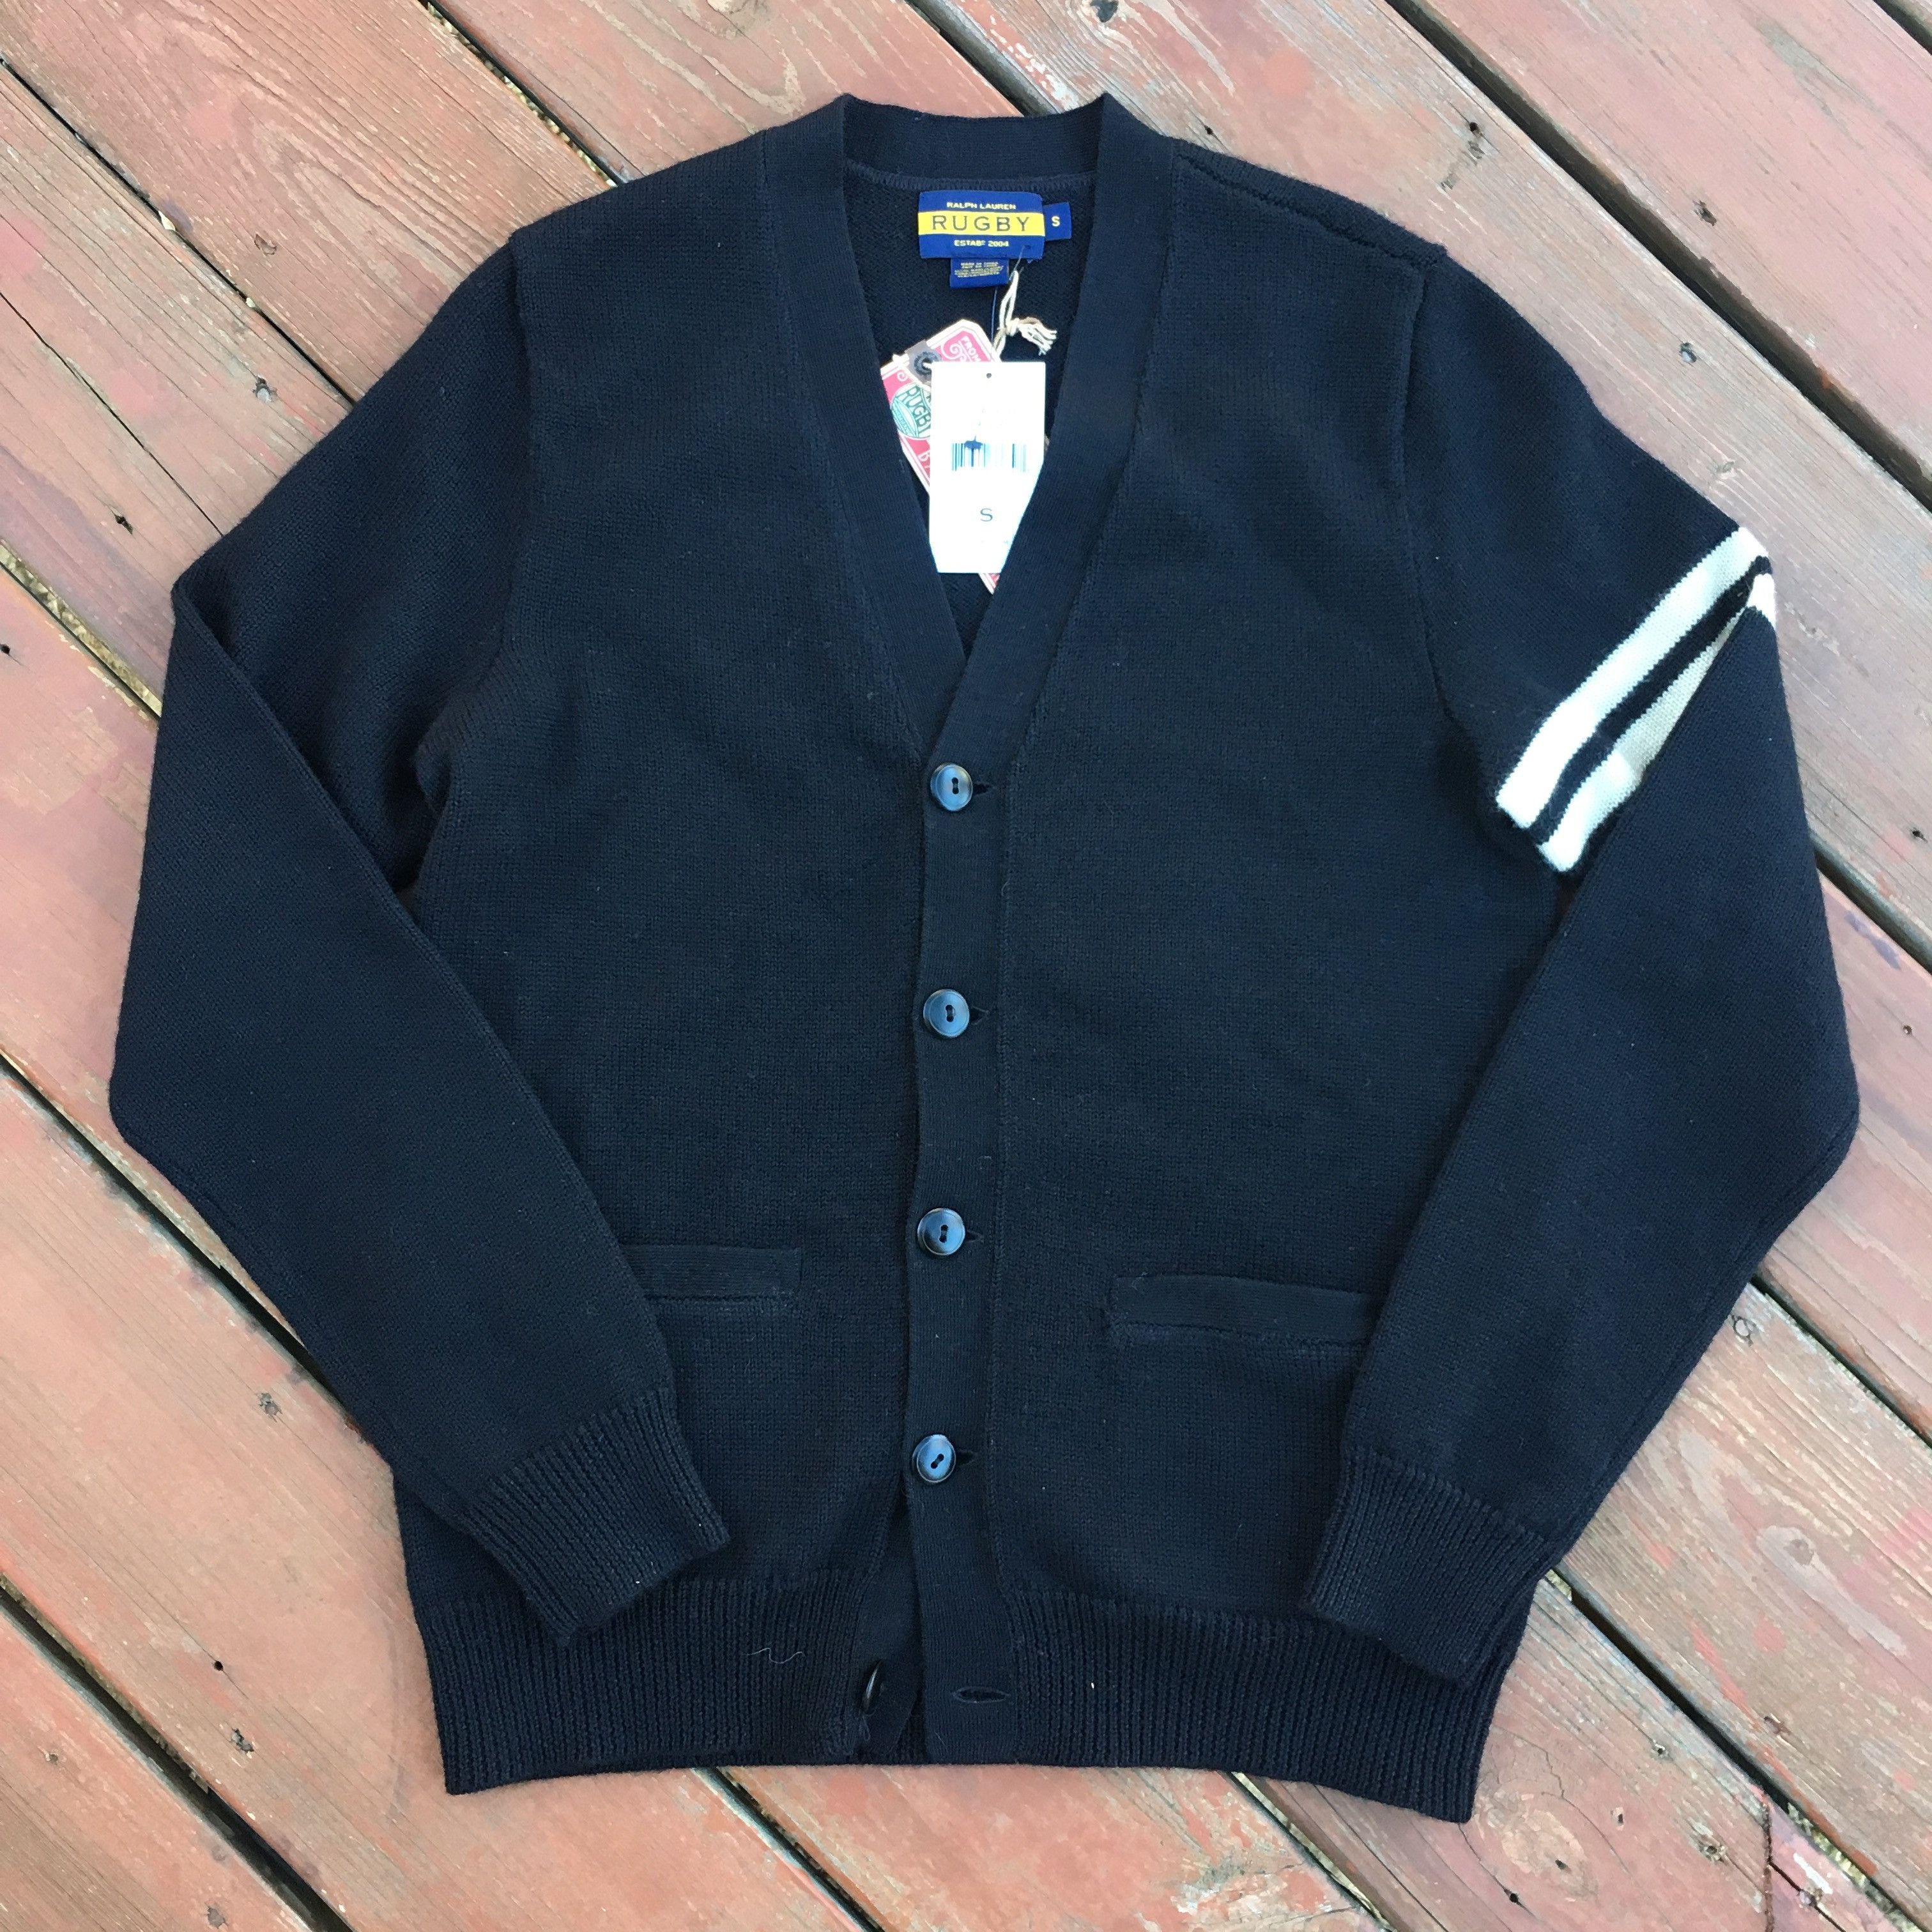 Ralph Lauren Rugby Rugby Cardigan Sweater | Grailed